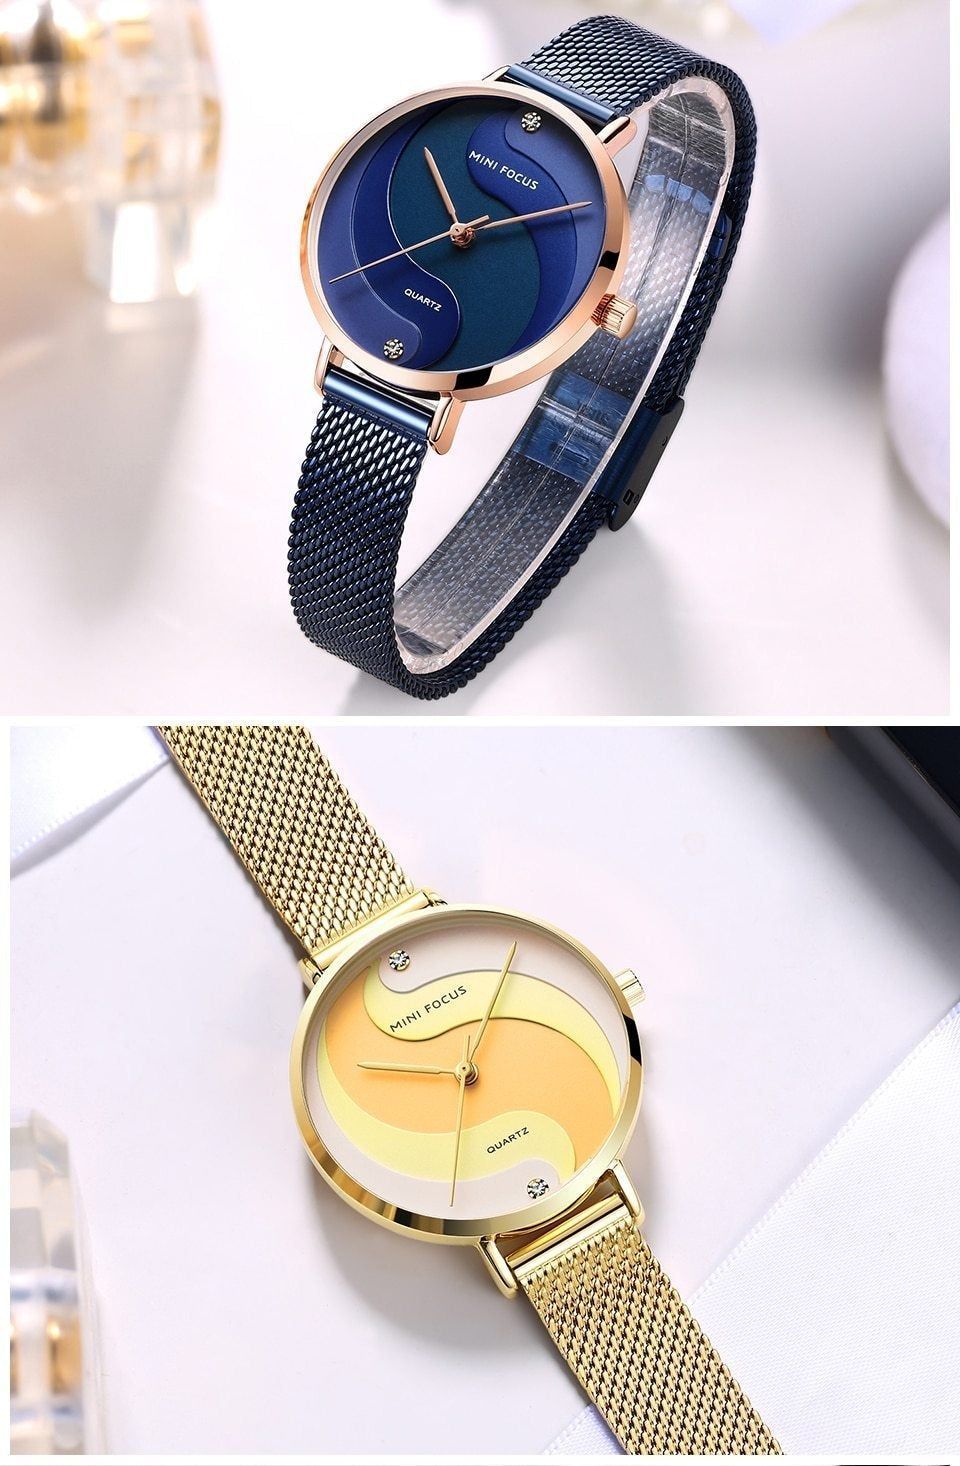 Women Watches Waterproof Top Luxury Fashion Casual Ladies Watch Quartz Stainless Steel TM0202 - Touchy Style .